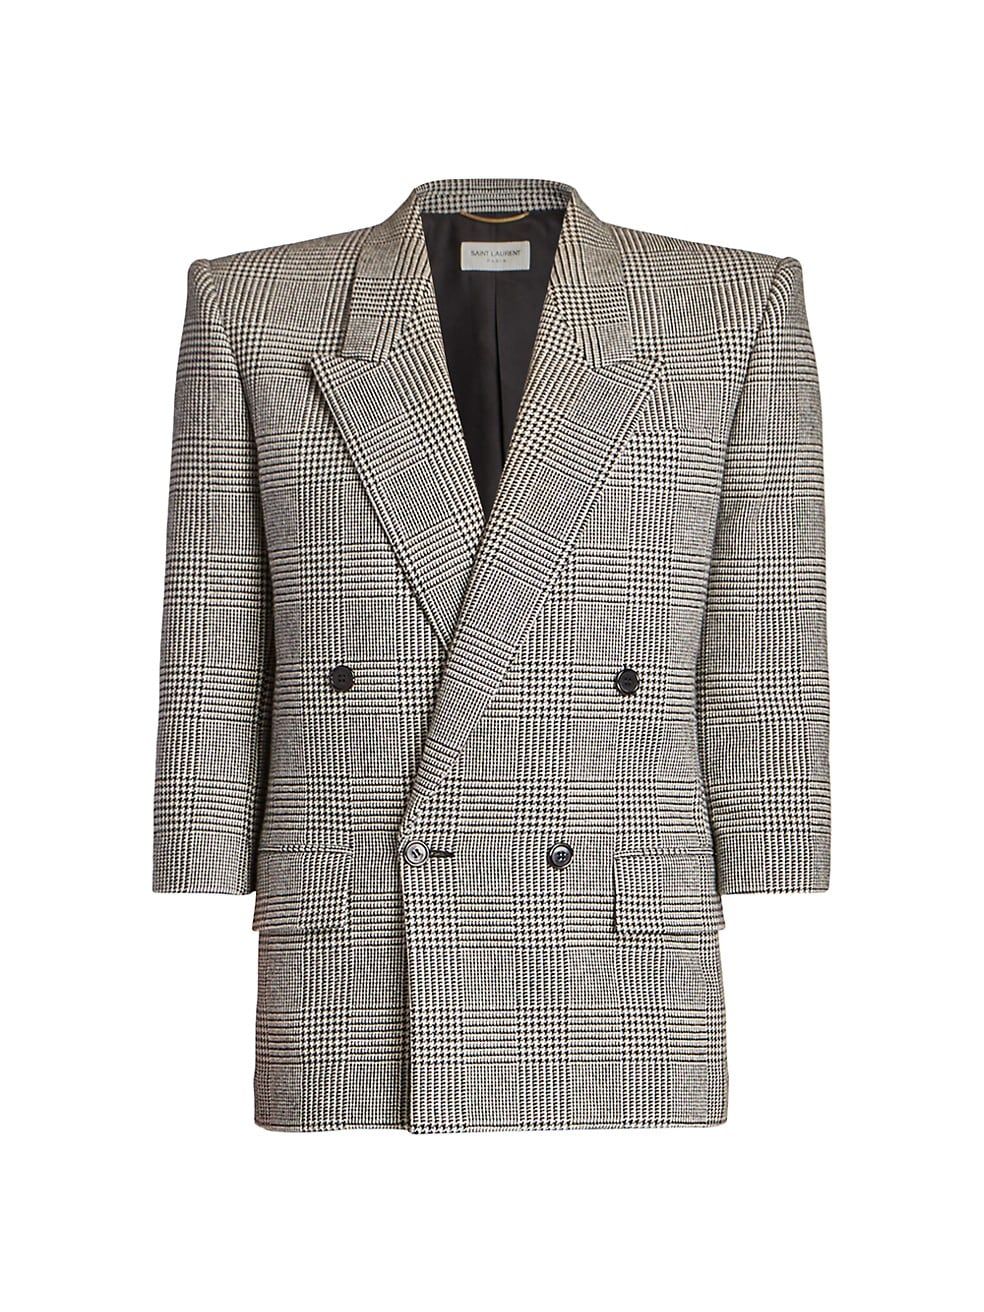 Glen Check Double-Breasted Jacket | Saks Fifth Avenue